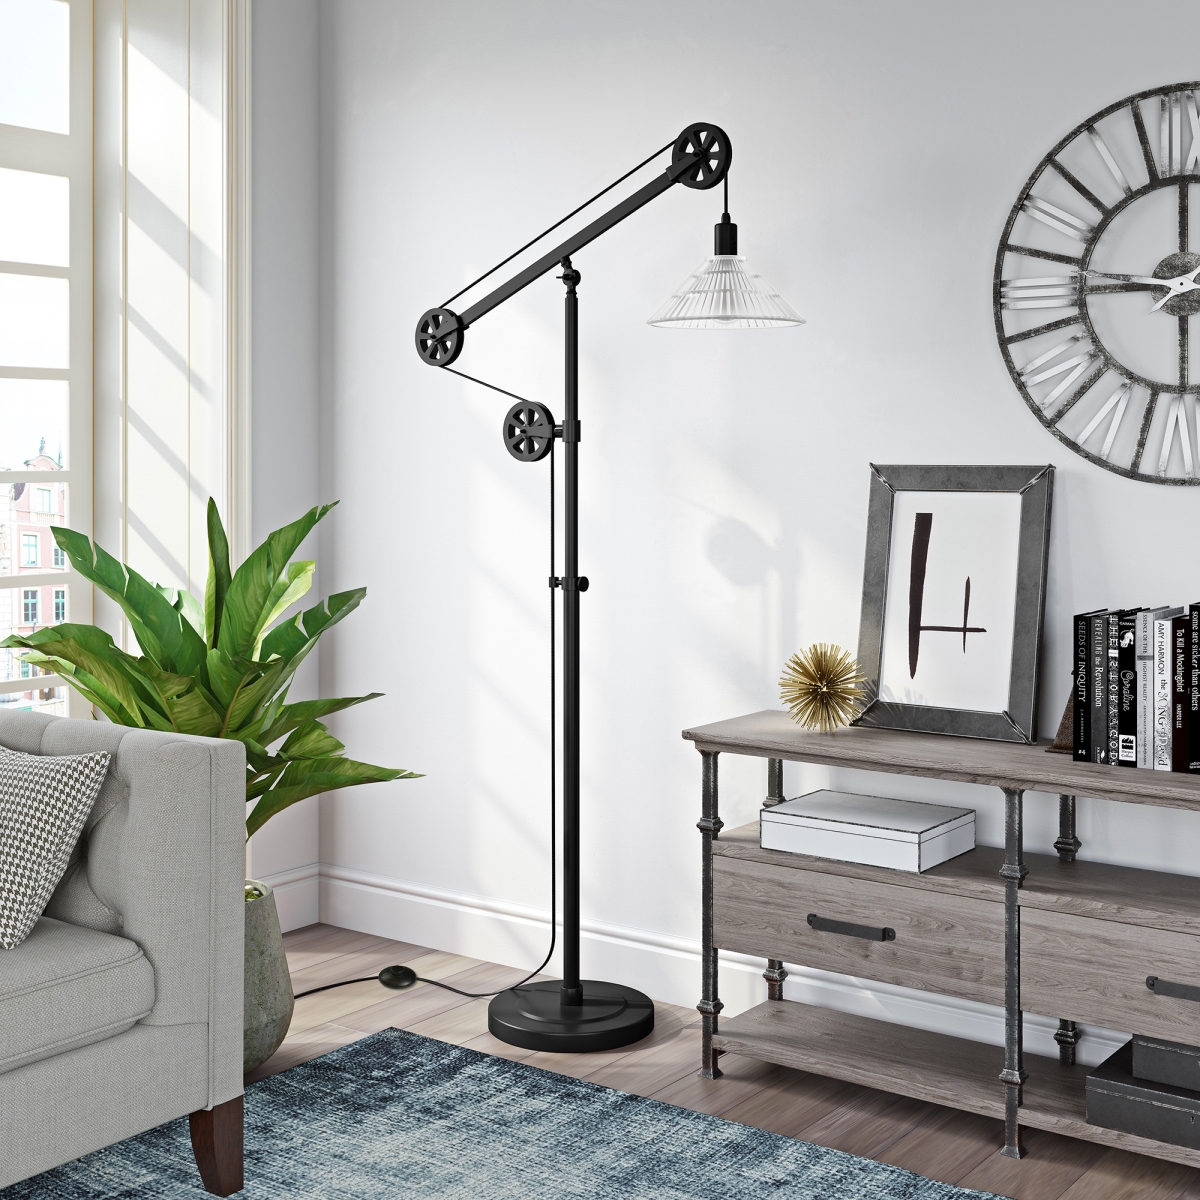 Picture of Henn & Hart FL0157 Descartes Blackened Bronze Floor Lamp with Ribbed Glass Shade & Pulley System